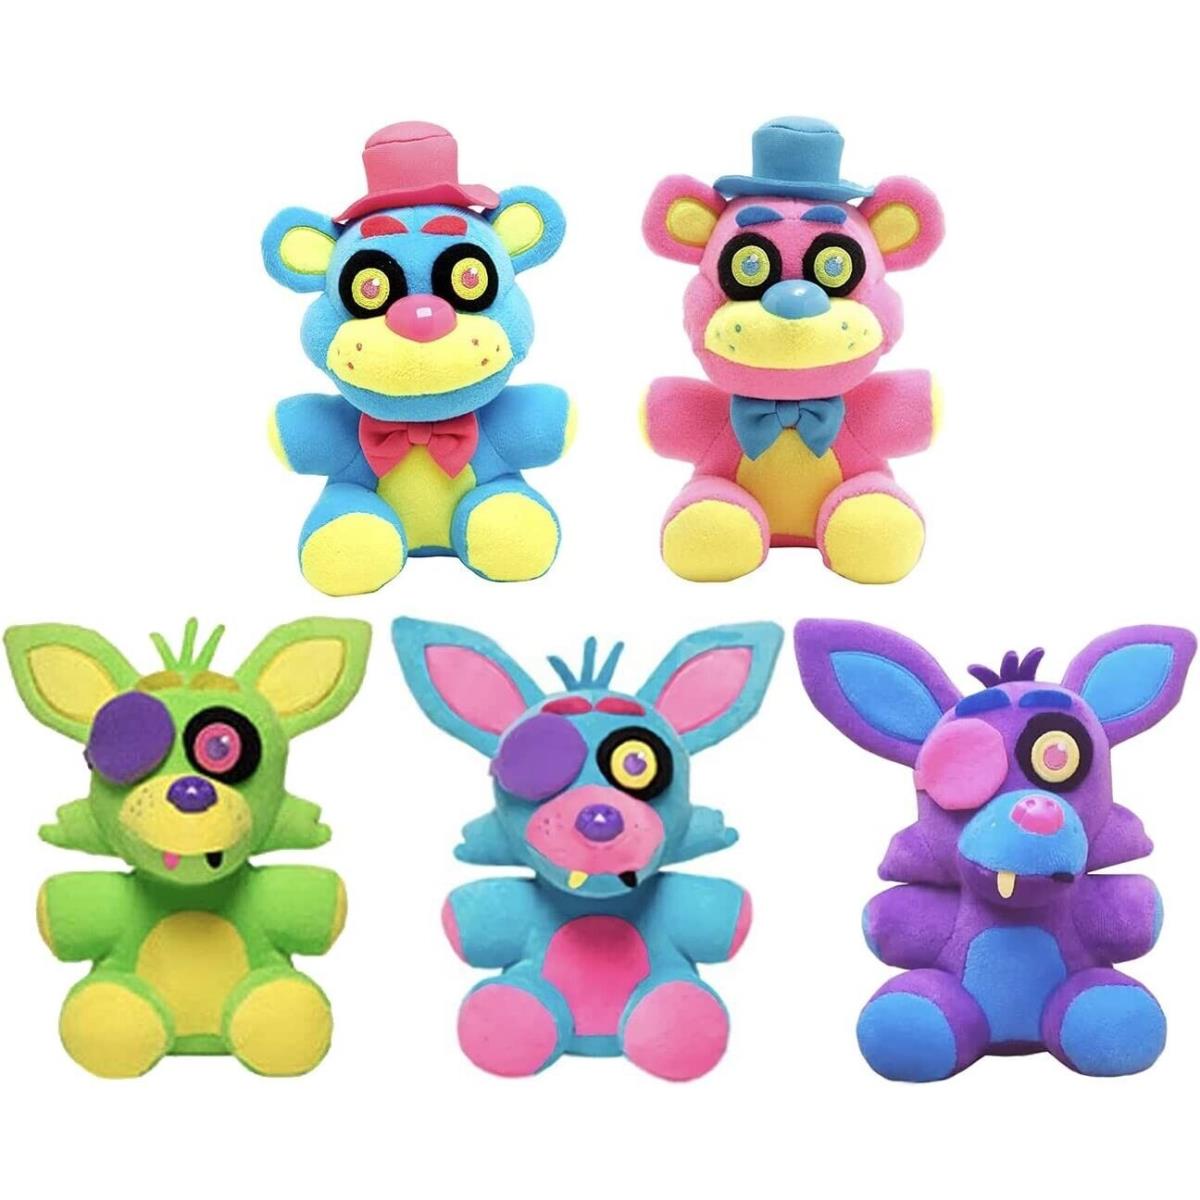 Funko Five Nights at Freddy`s Blacklight 7 Plush Inches Set OF 5 Pieces